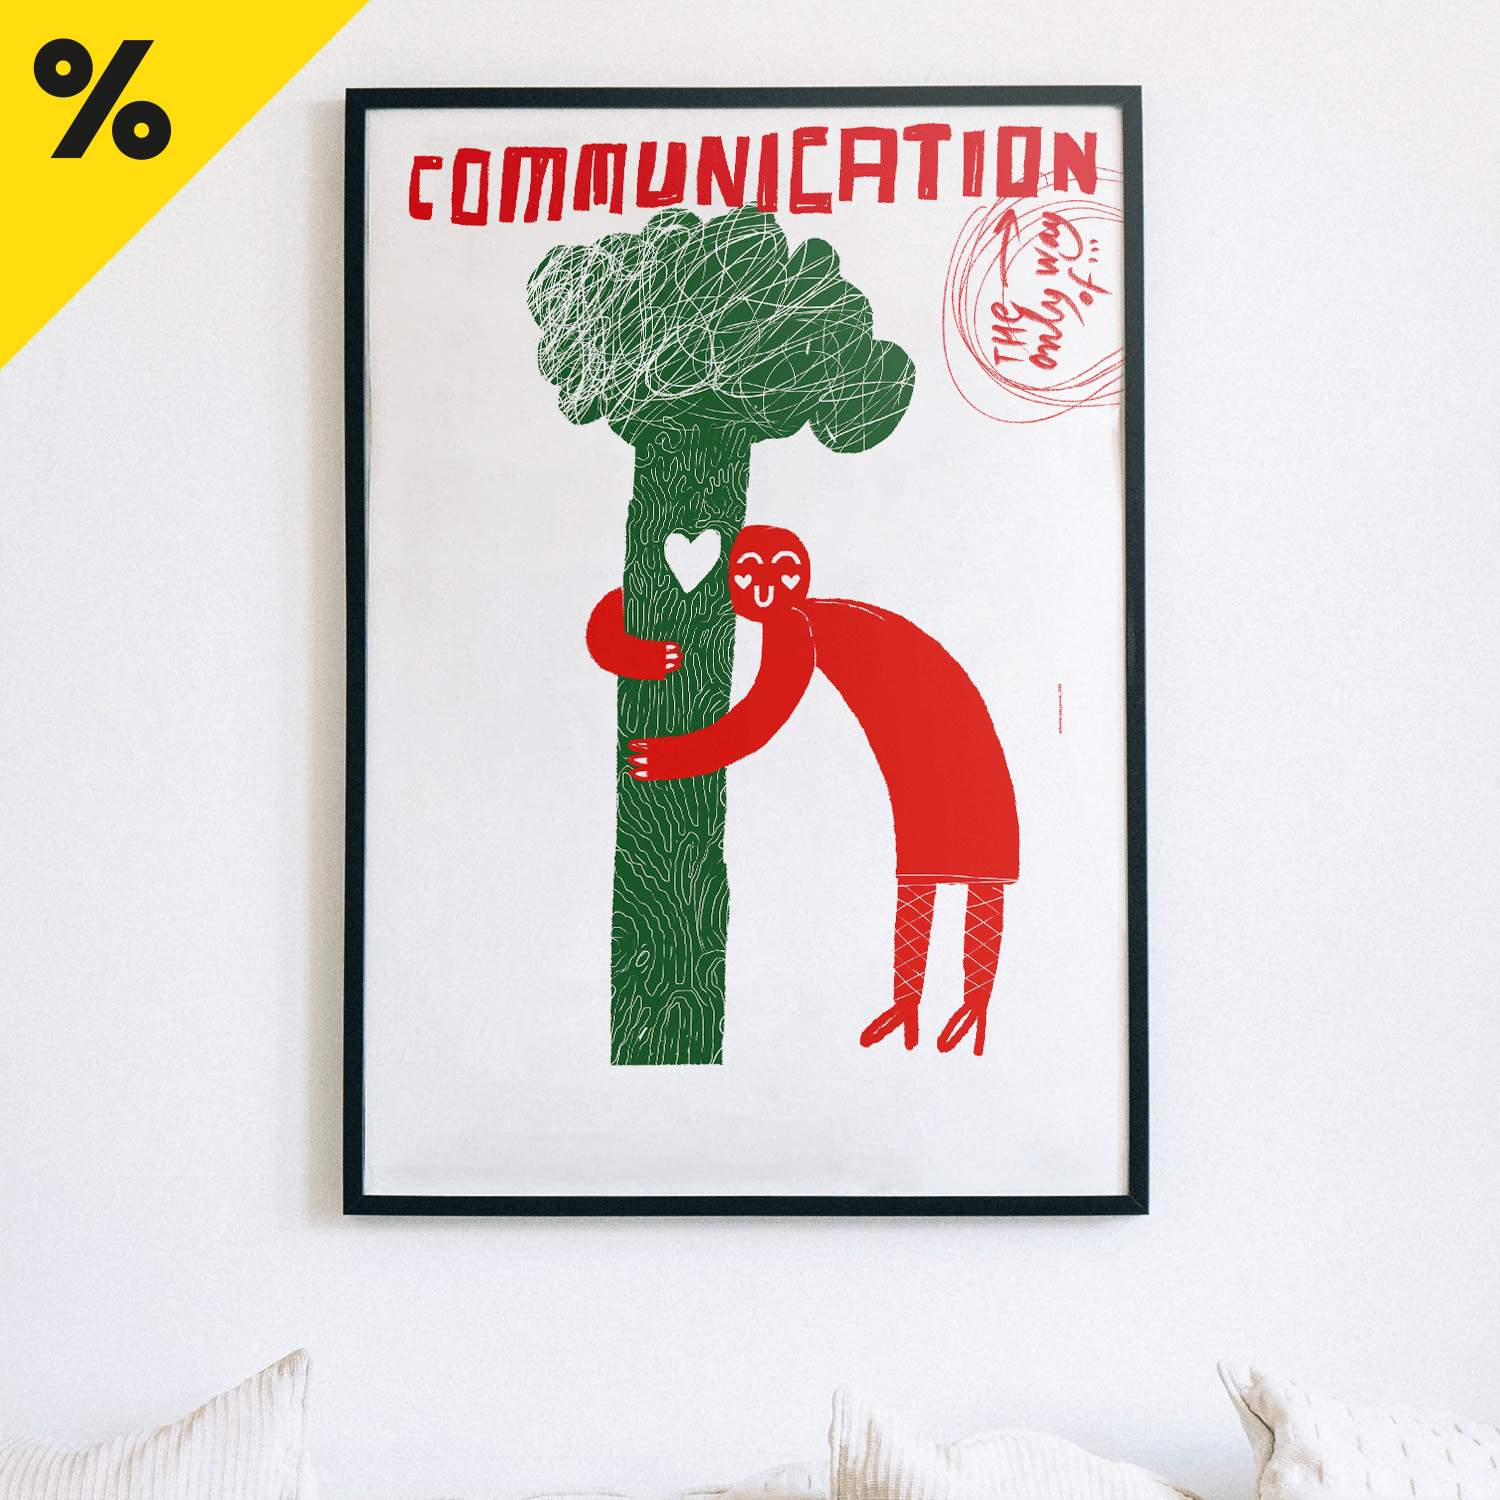 Plakat: "The only way of communication"